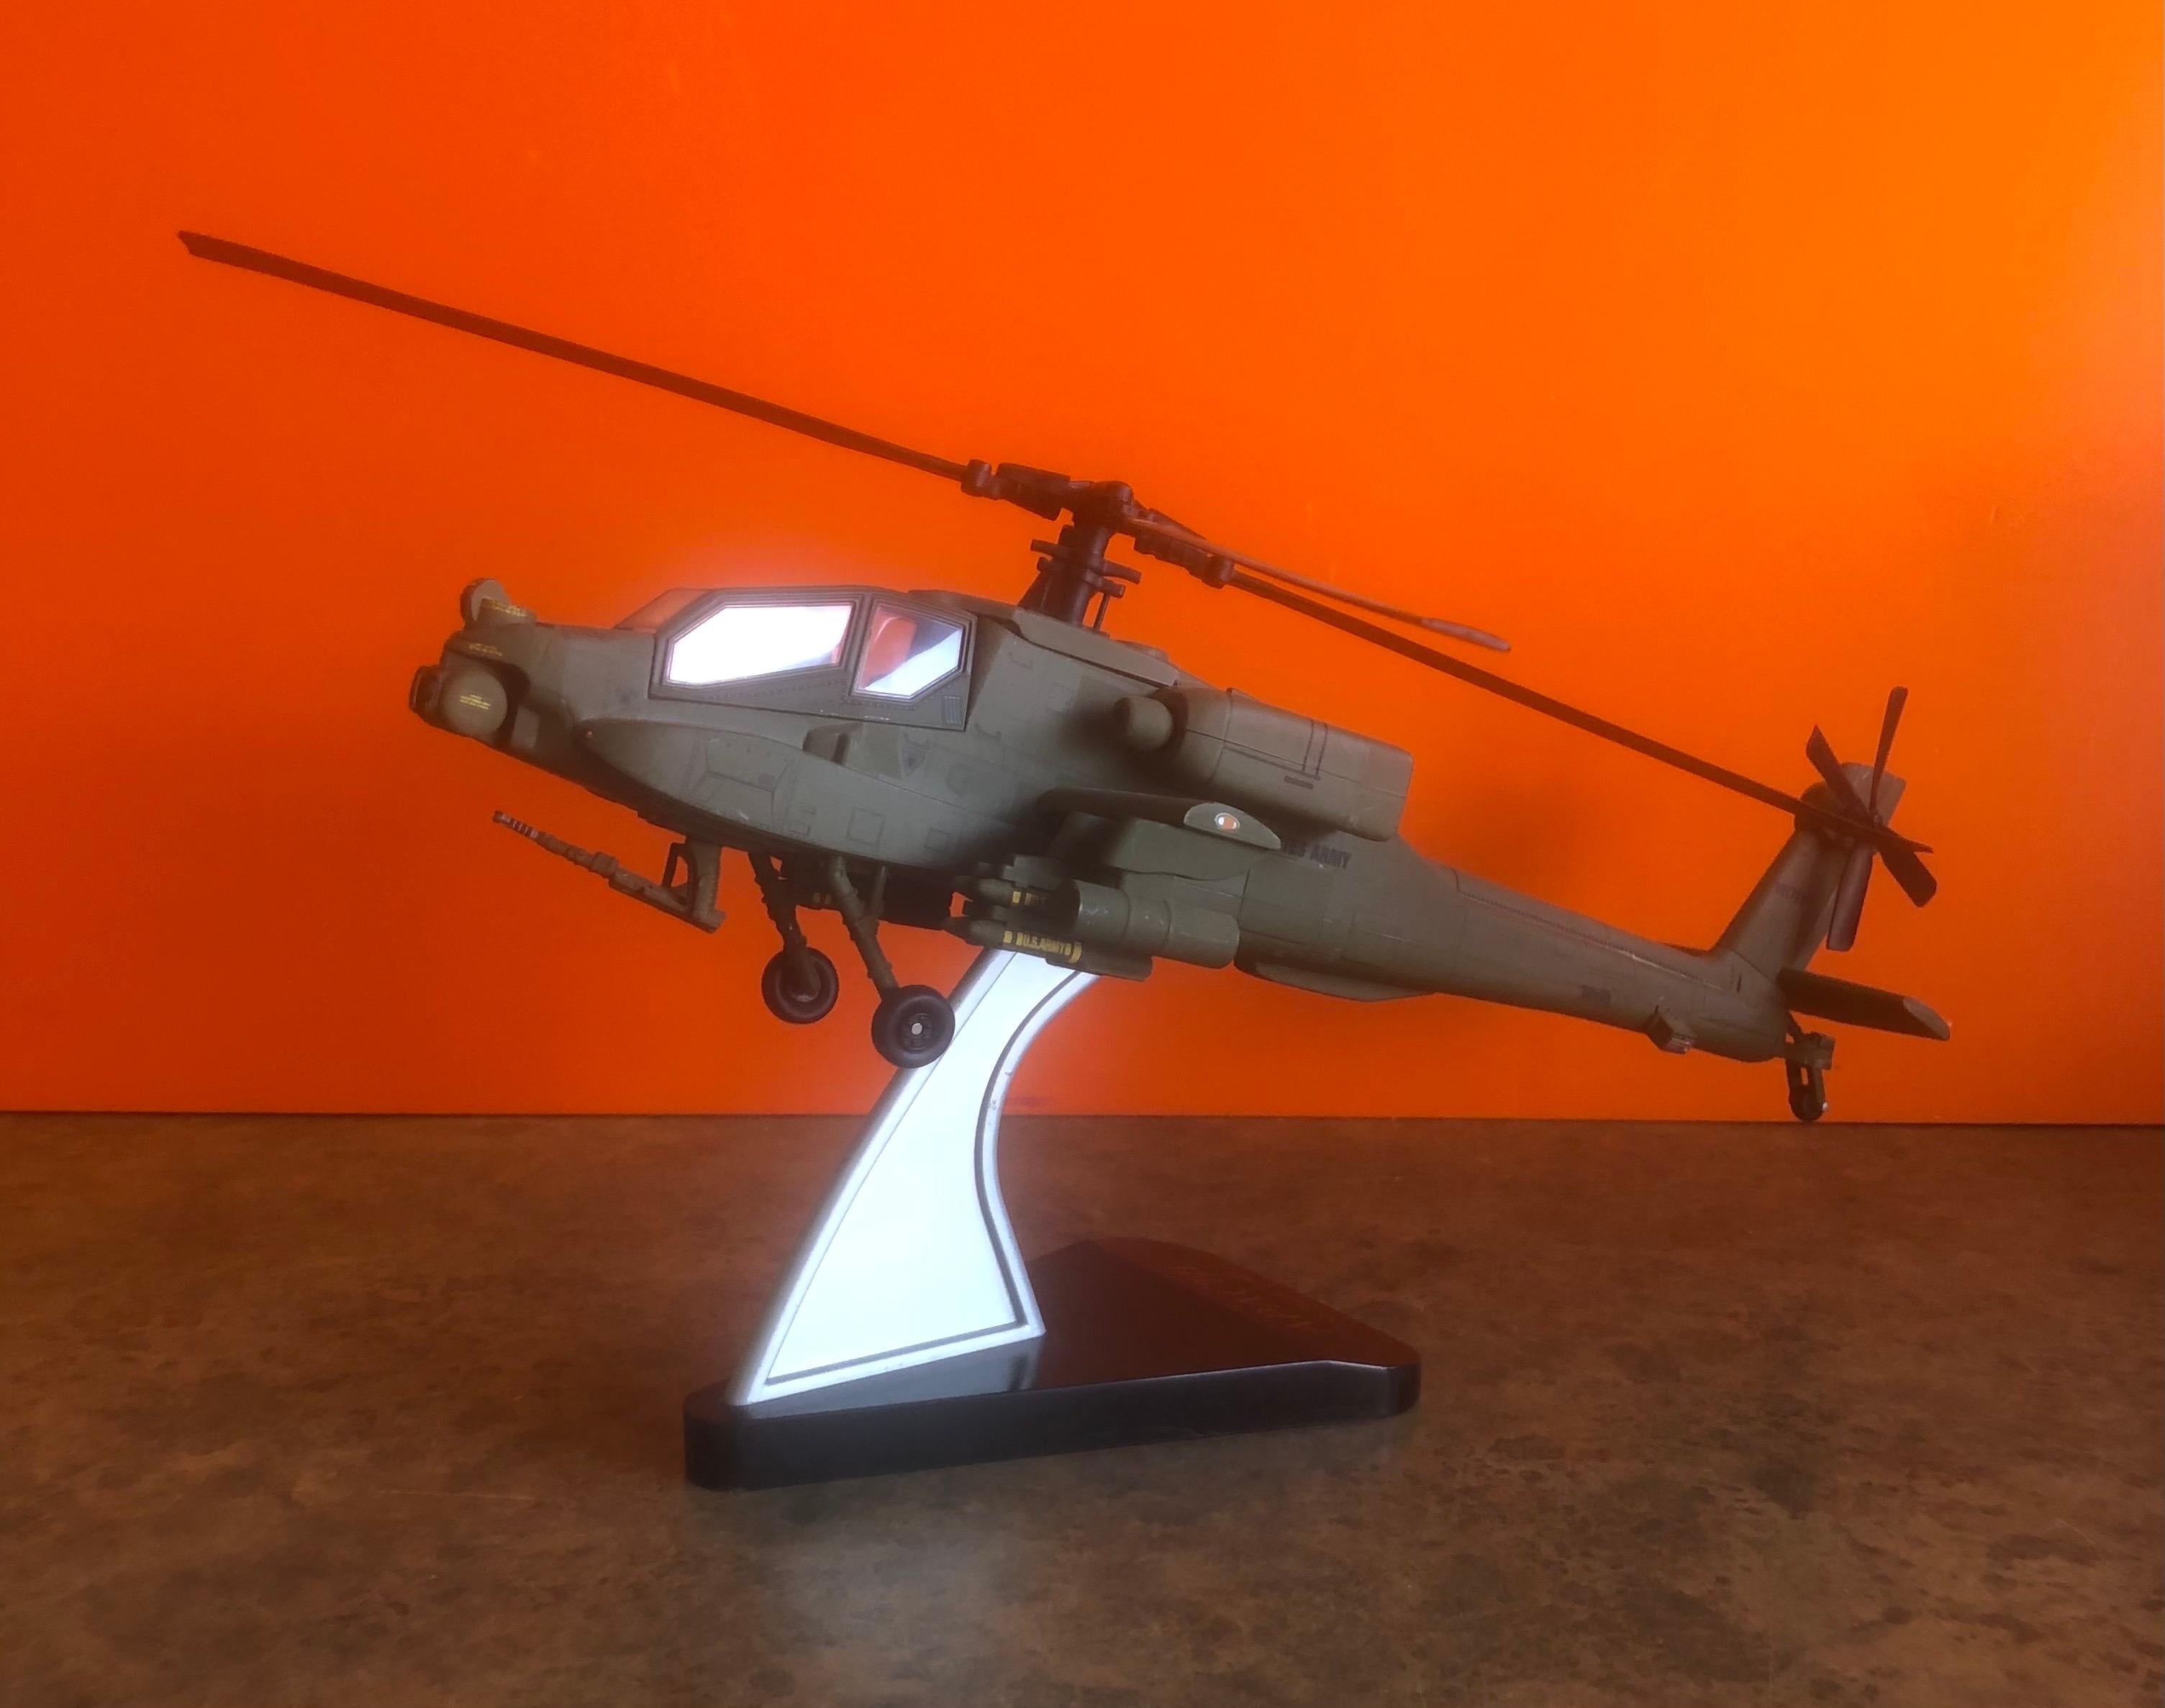 A very cool Blawkhawk helicopter desk model, circa 2000s. The piece is in very good condition and super high quality with great detail. The helicopter is 1:40 scale and made of molded plastic and mounted on a triangular base. #1371